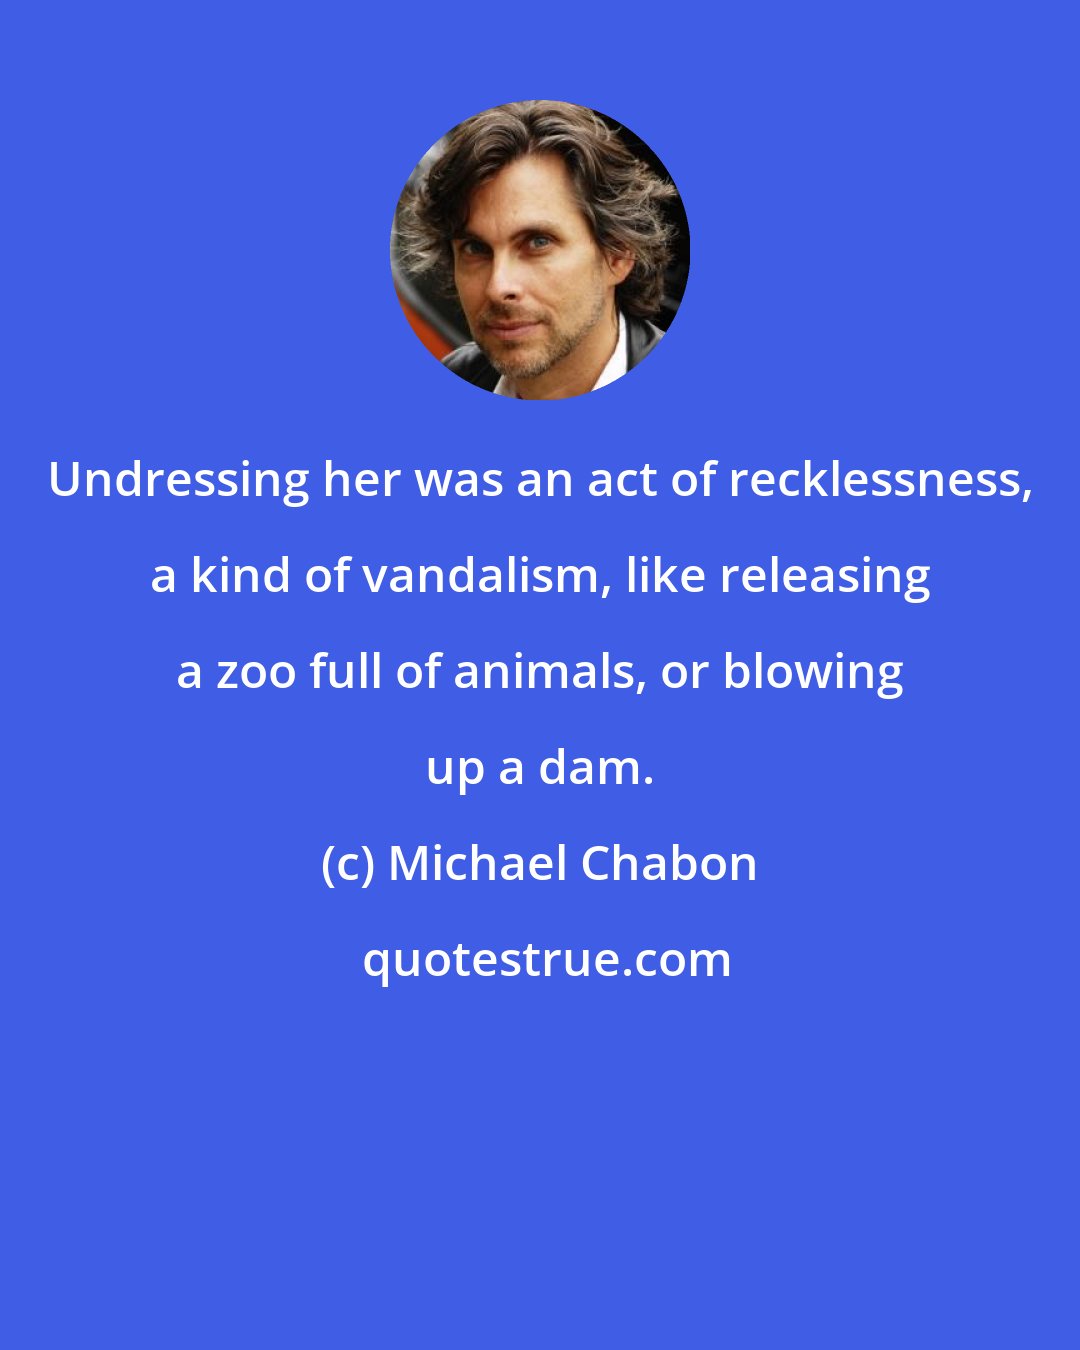 Michael Chabon: Undressing her was an act of recklessness, a kind of vandalism, like releasing a zoo full of animals, or blowing up a dam.